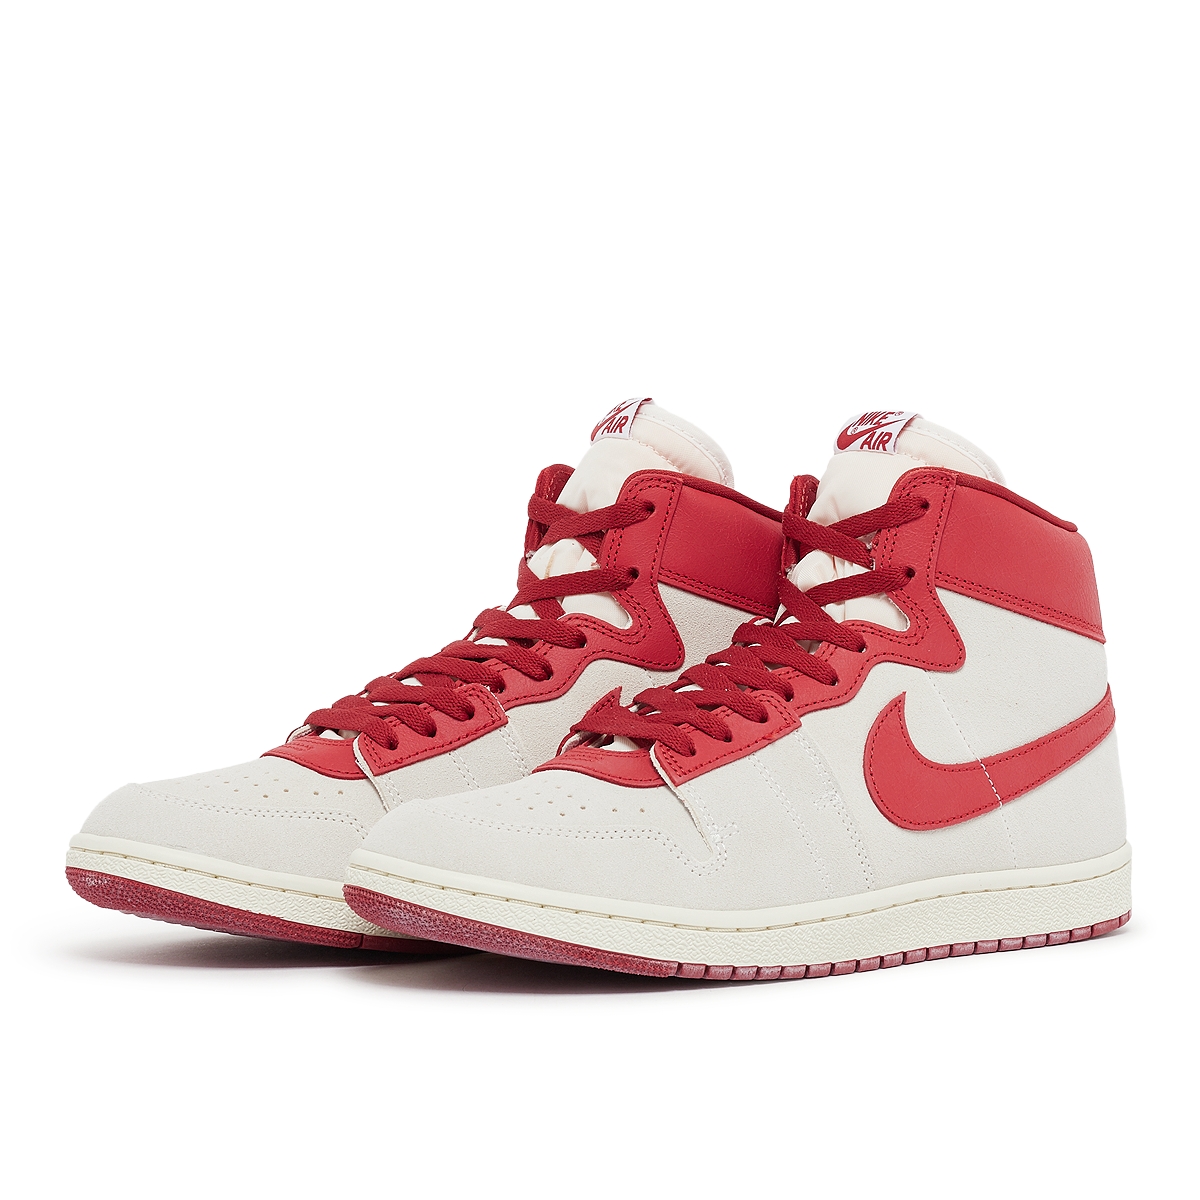 Air Ship PE SP "Every Game" (Dune Red)